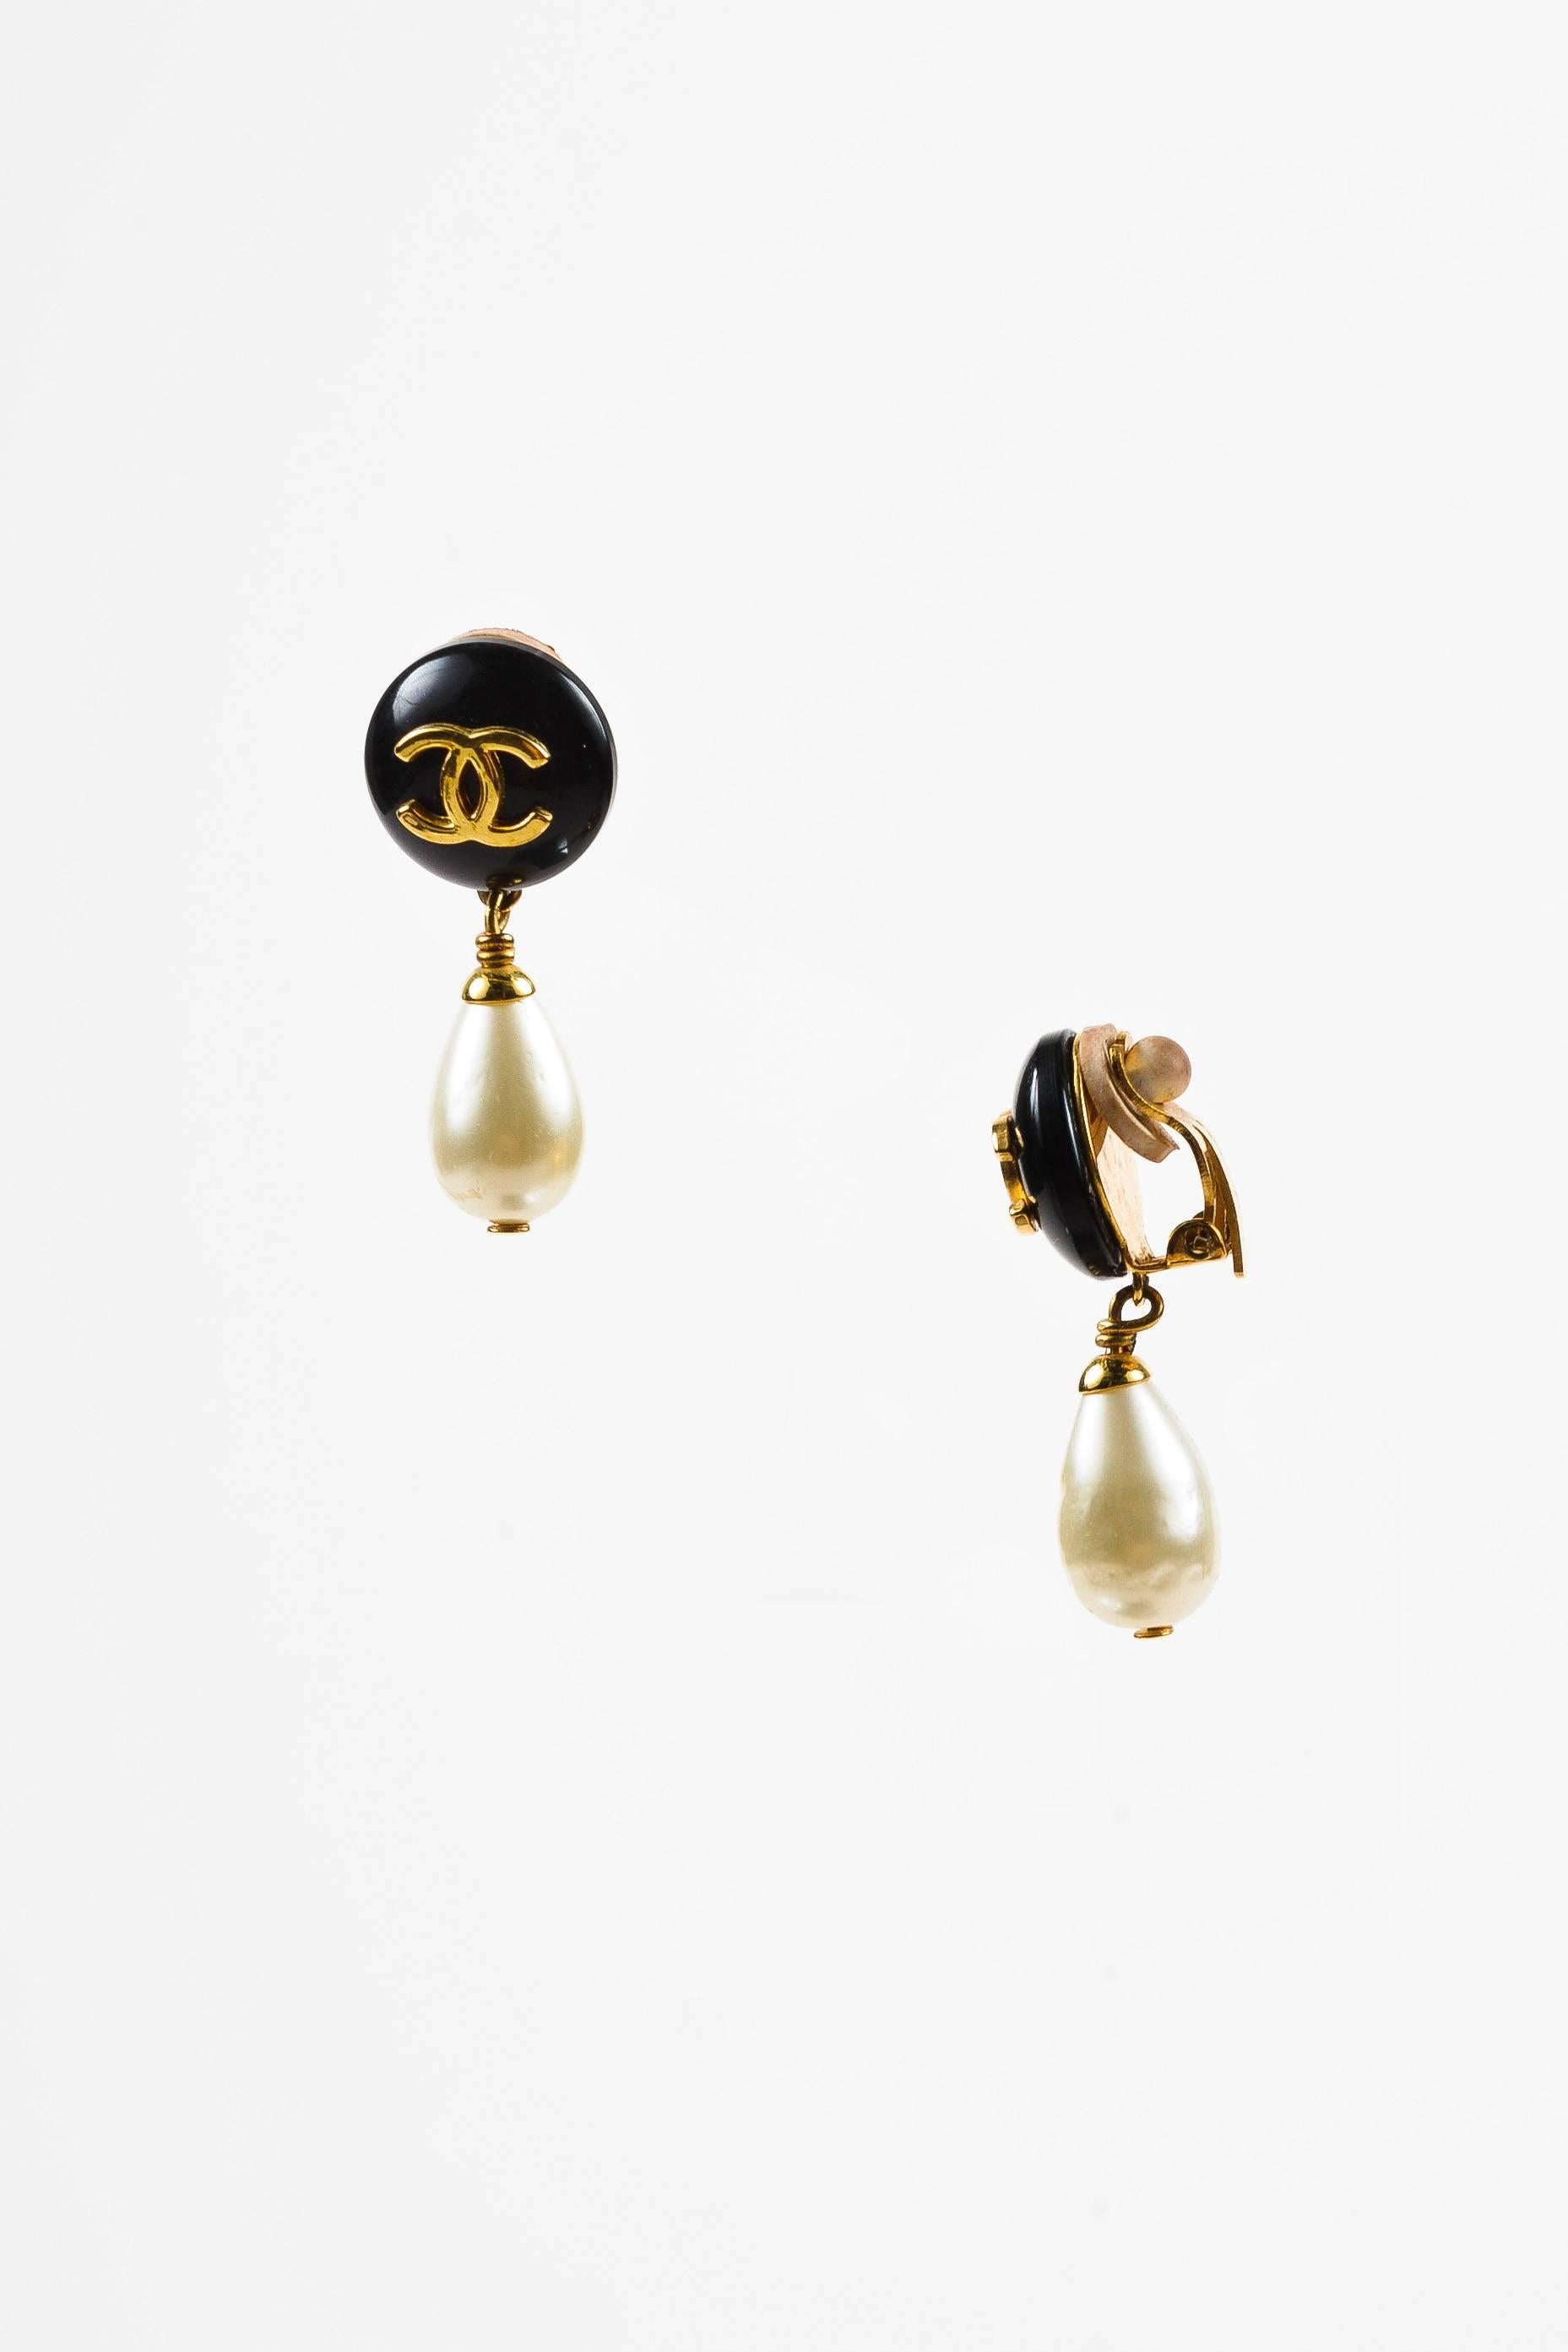 Vintage earrings from the Spring 1996 collection, features an elegant drop silhouette, an interlocking 'CC' accent on resin, and a dangling faux pearl detail. Clip-on back. Comes in a box. A subtle piece of iconography, these earrings are a